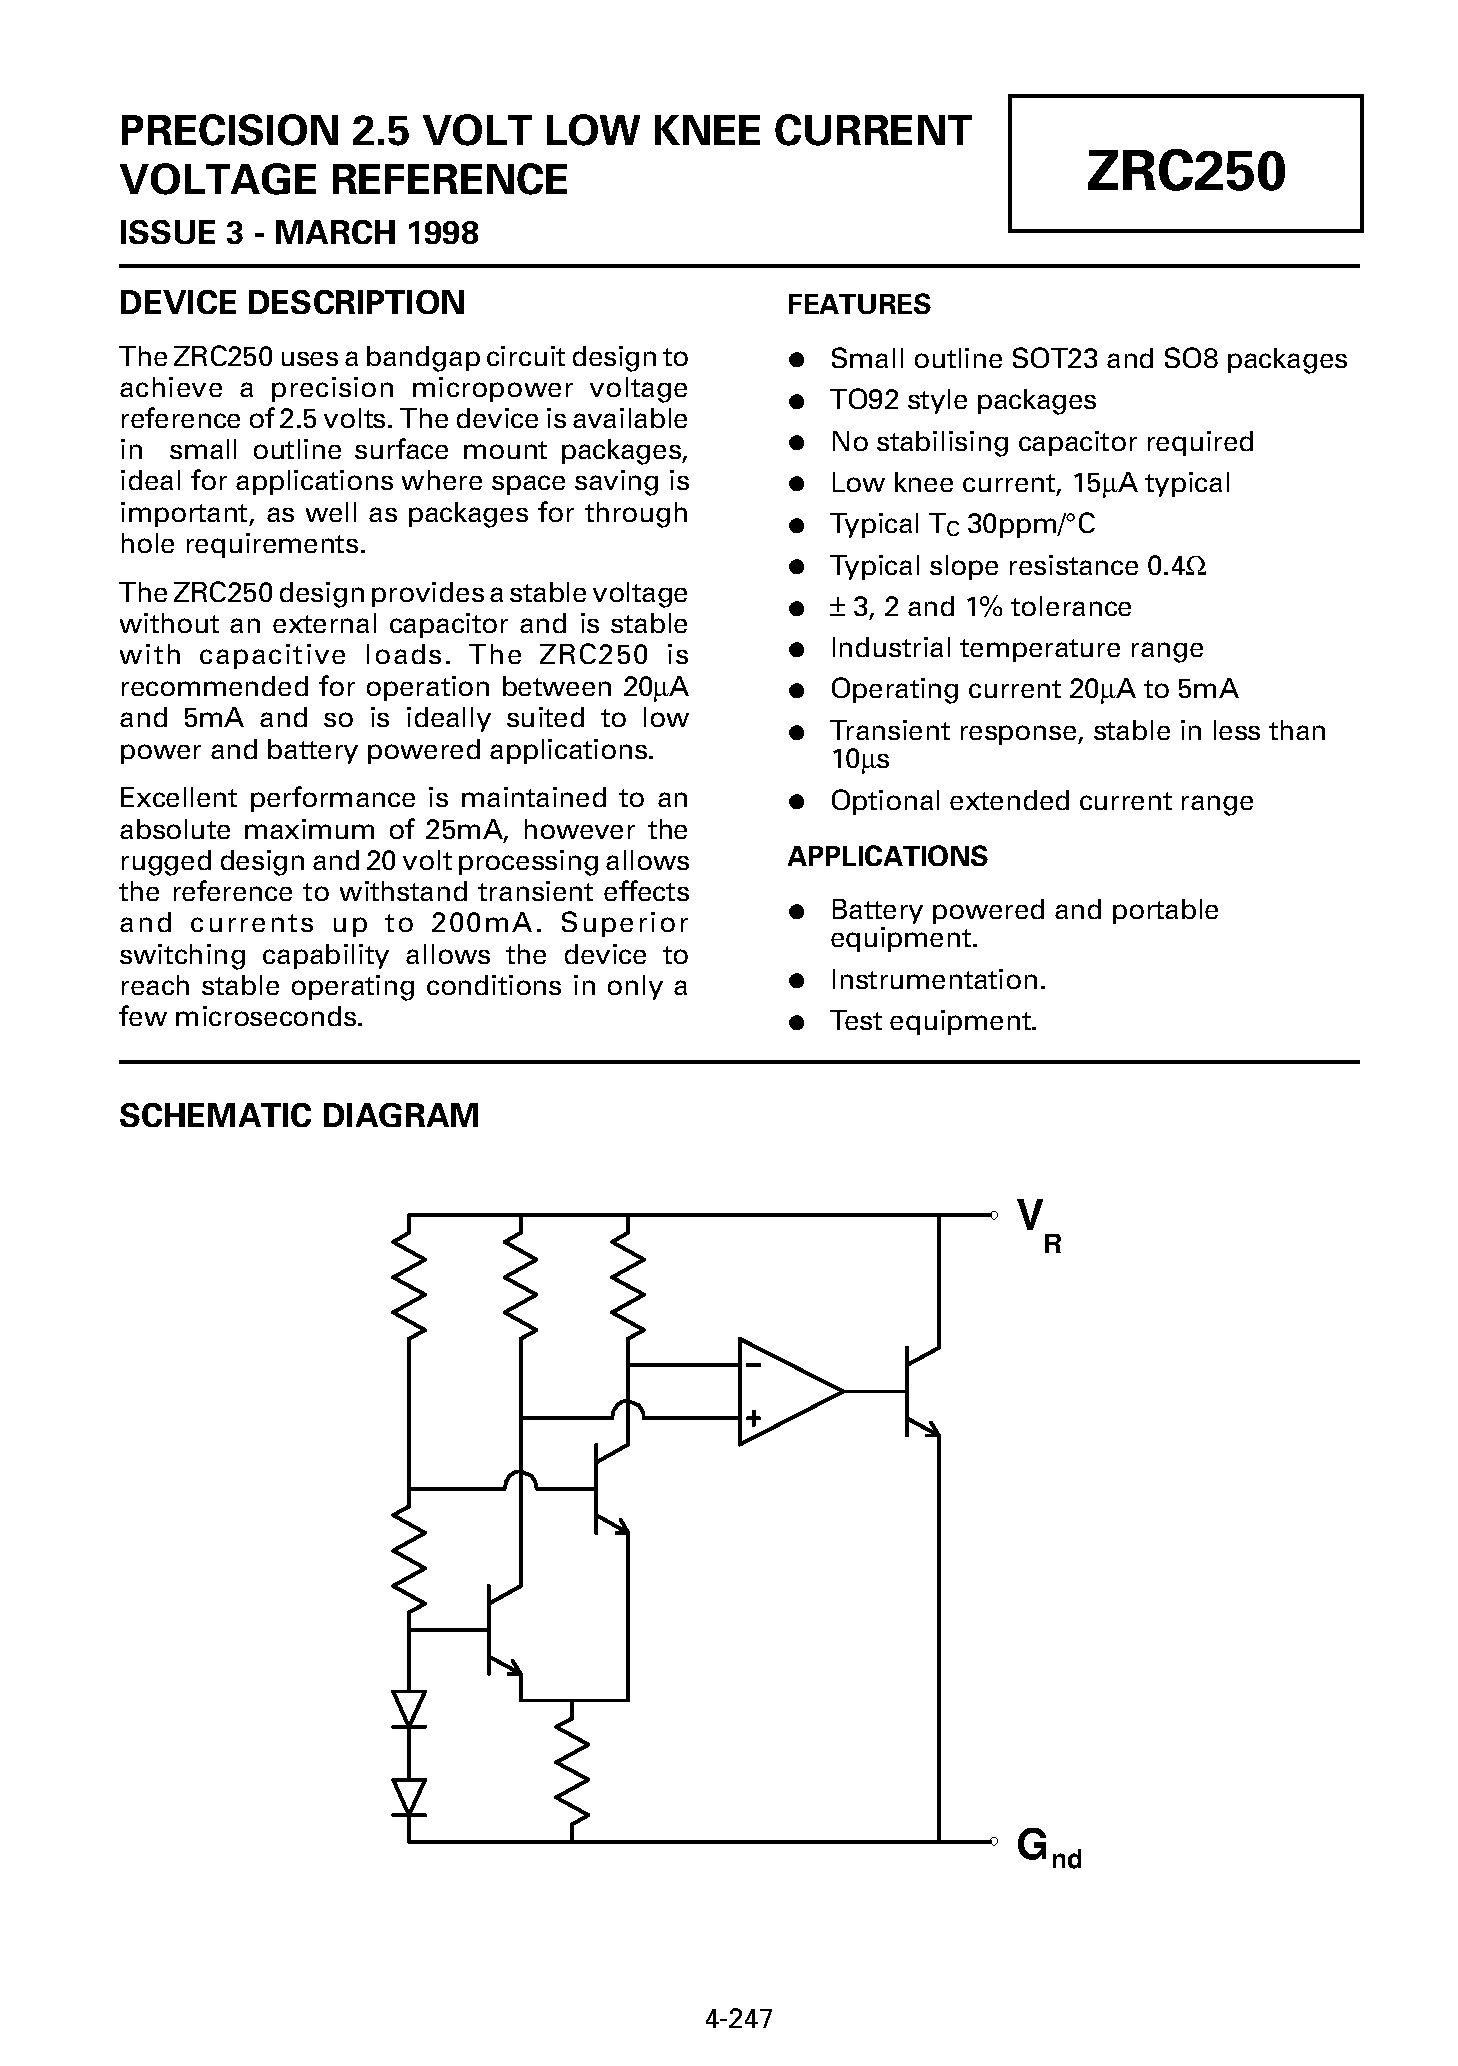 Datasheet ZRC250R01 - PRECISION 2.5 VOLT LOW KNEE CURRENT VOLTAGE REFERENCE page 1